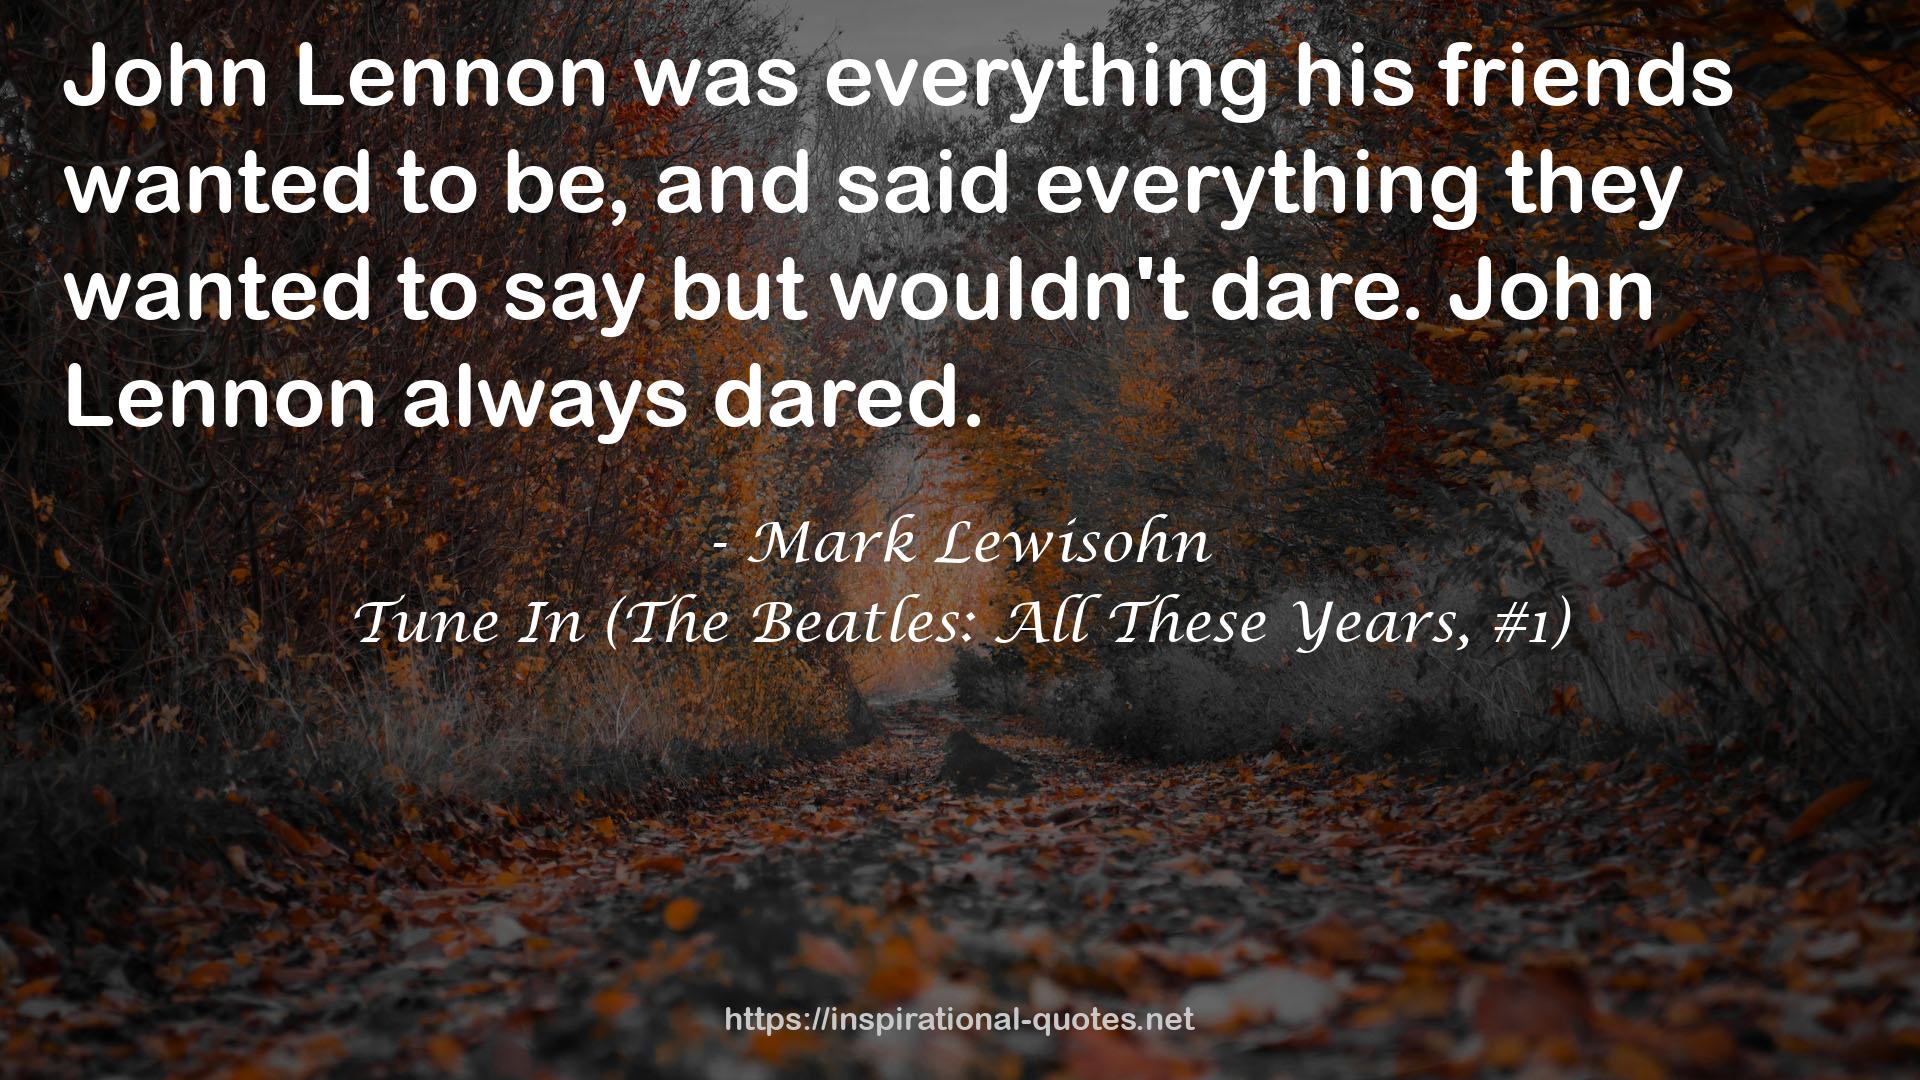 Tune In (The Beatles: All These Years, #1) QUOTES